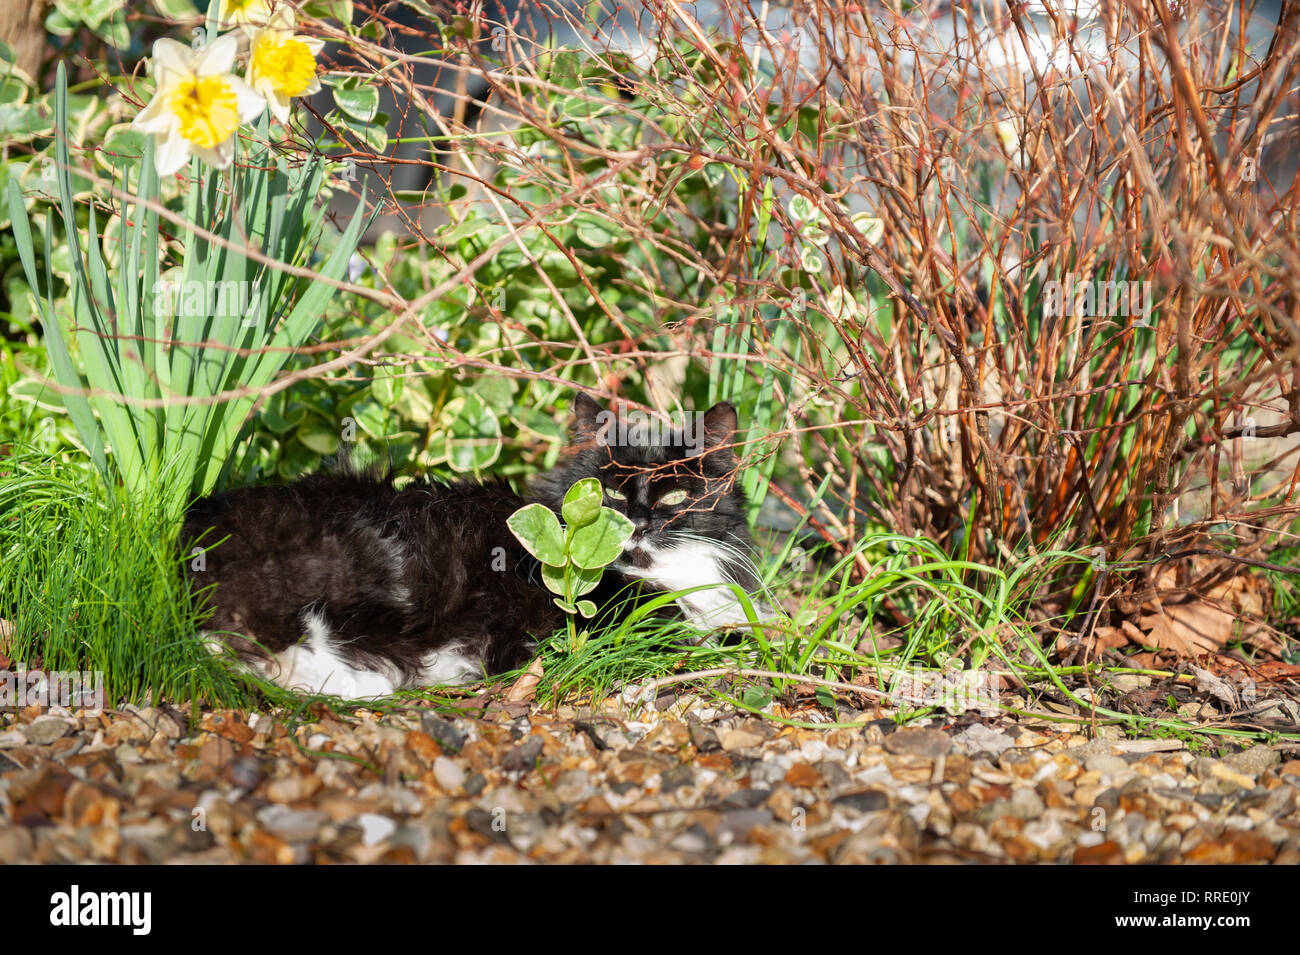 Black and White cat enjoying the sunshine lying amongst Greater Periwinkle (Vinca Major) and grass with a daffodil for company. Stock Photo